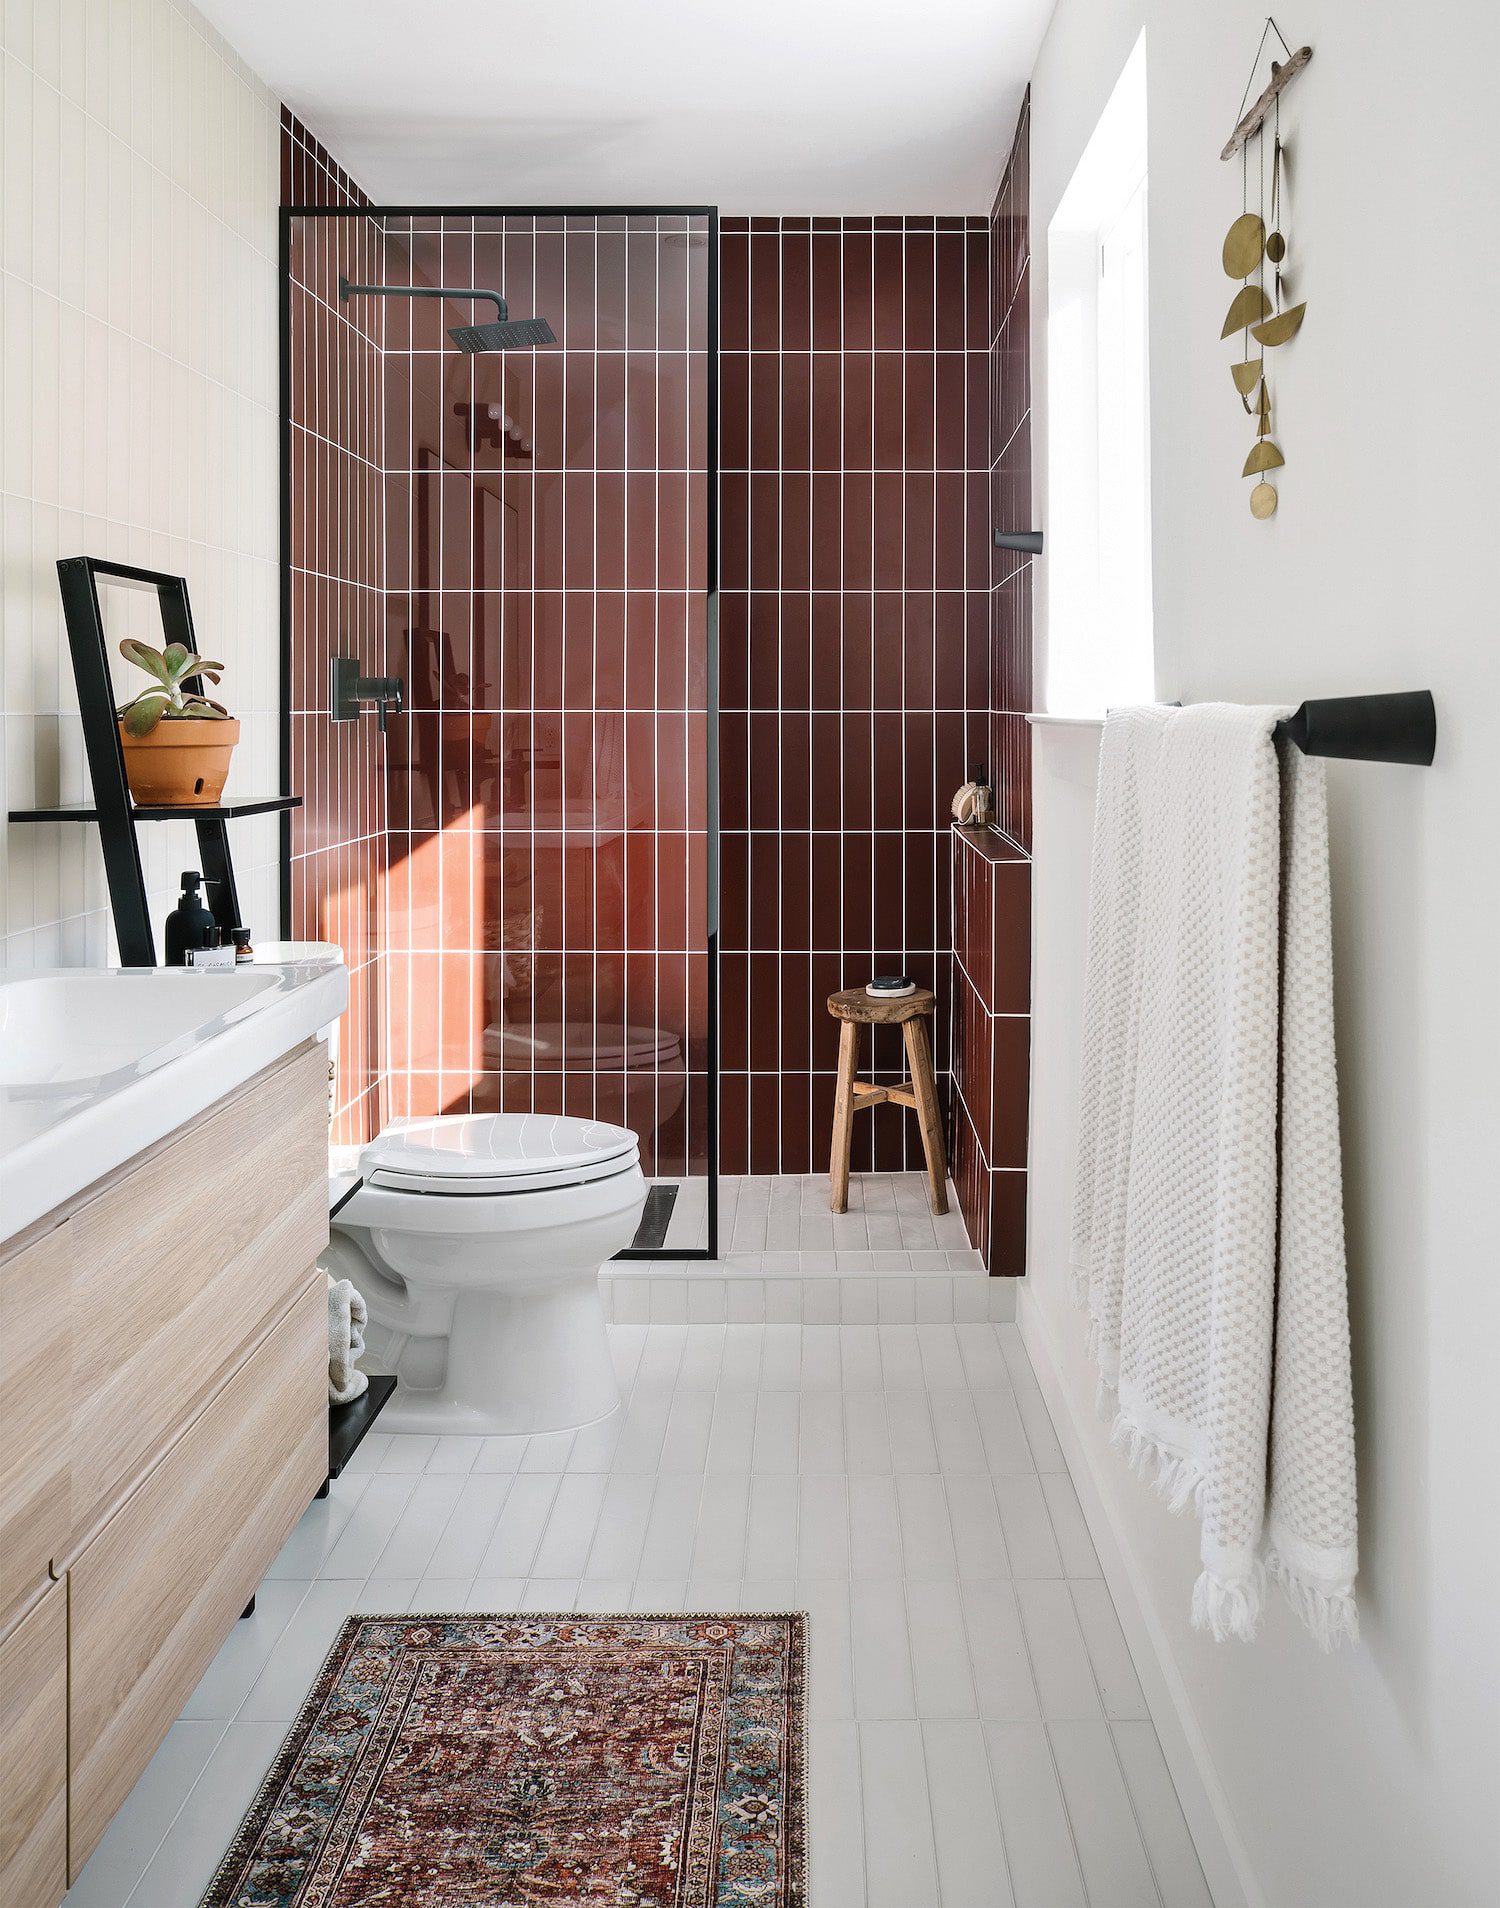 Bathroom with maroon tile in the shower and white tiled floors | Inspiration for Stacked Tile, stacked bond tile pattern, via Yellow Brick Home